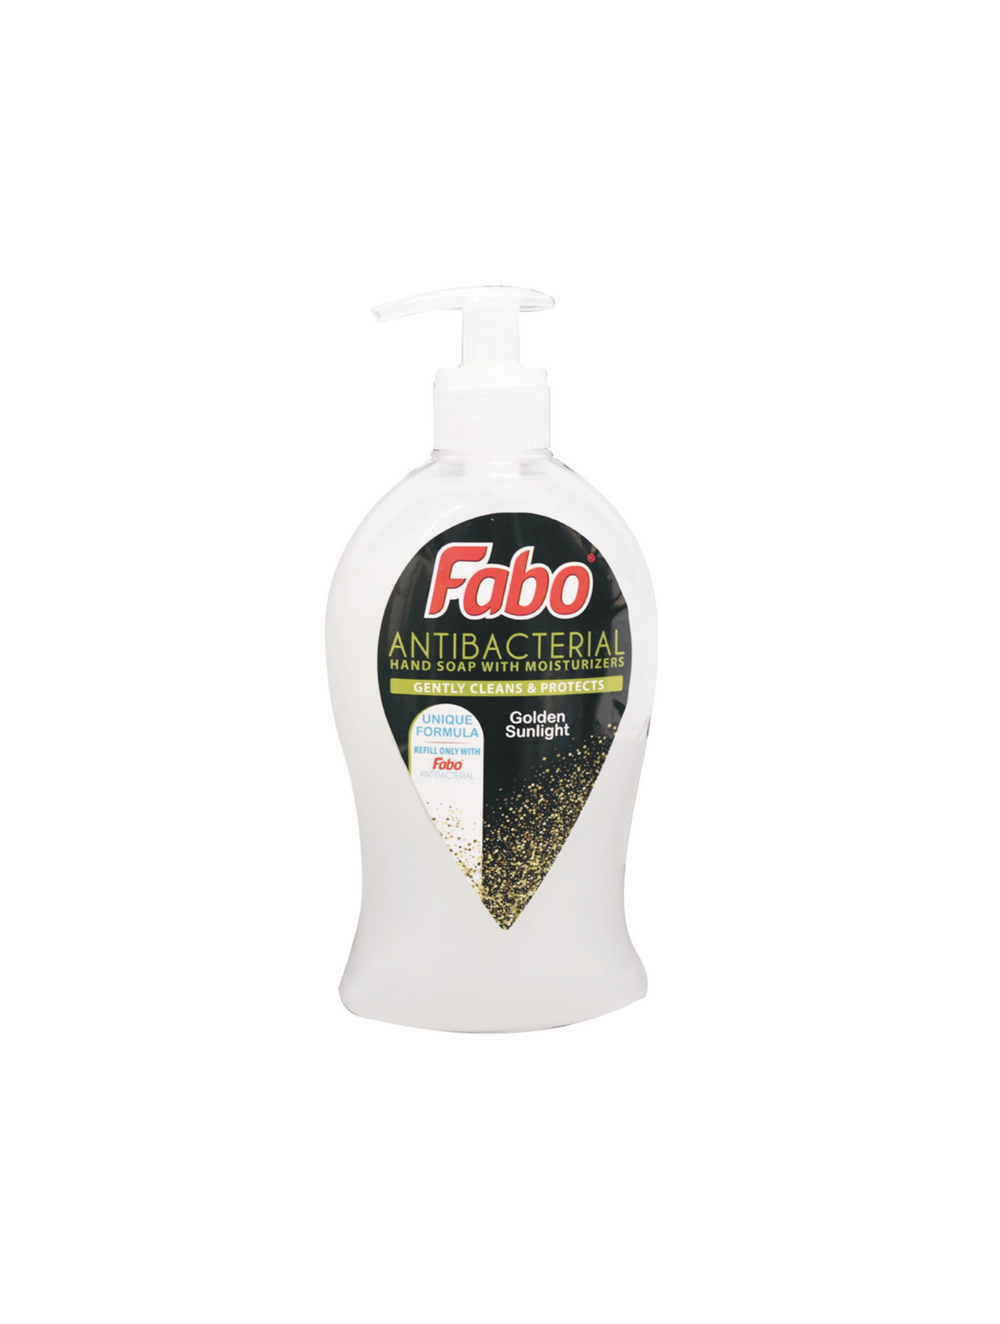 fabo-products_page-0084